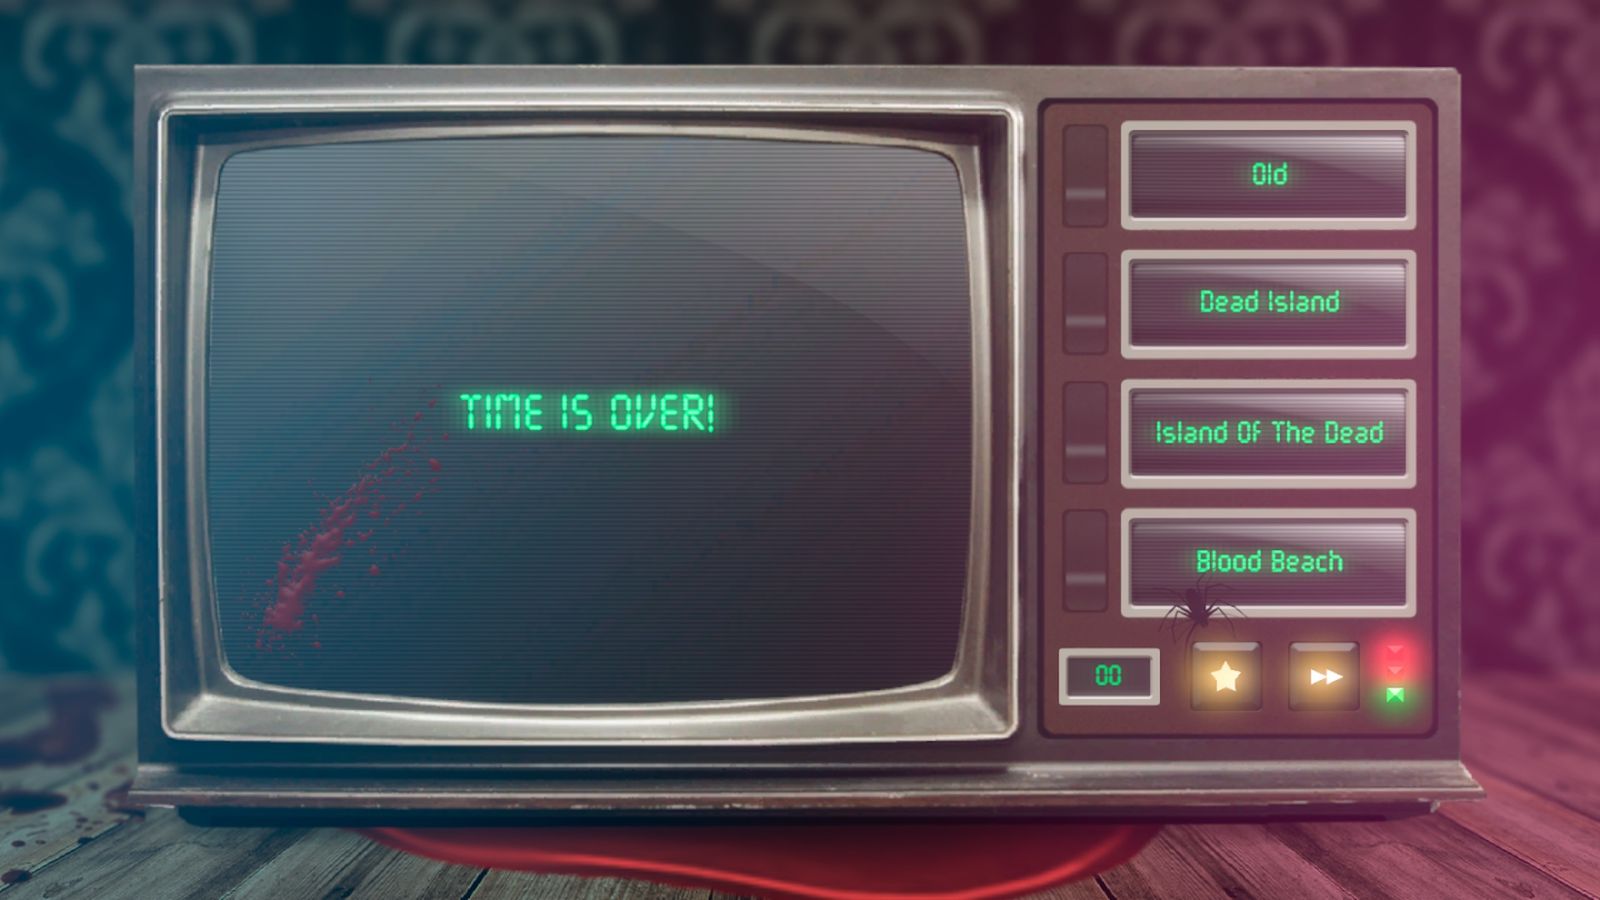 Screenshot from Scary Quiz Horror Movie Trivia, showing an old TV displaying a Game Over screen.